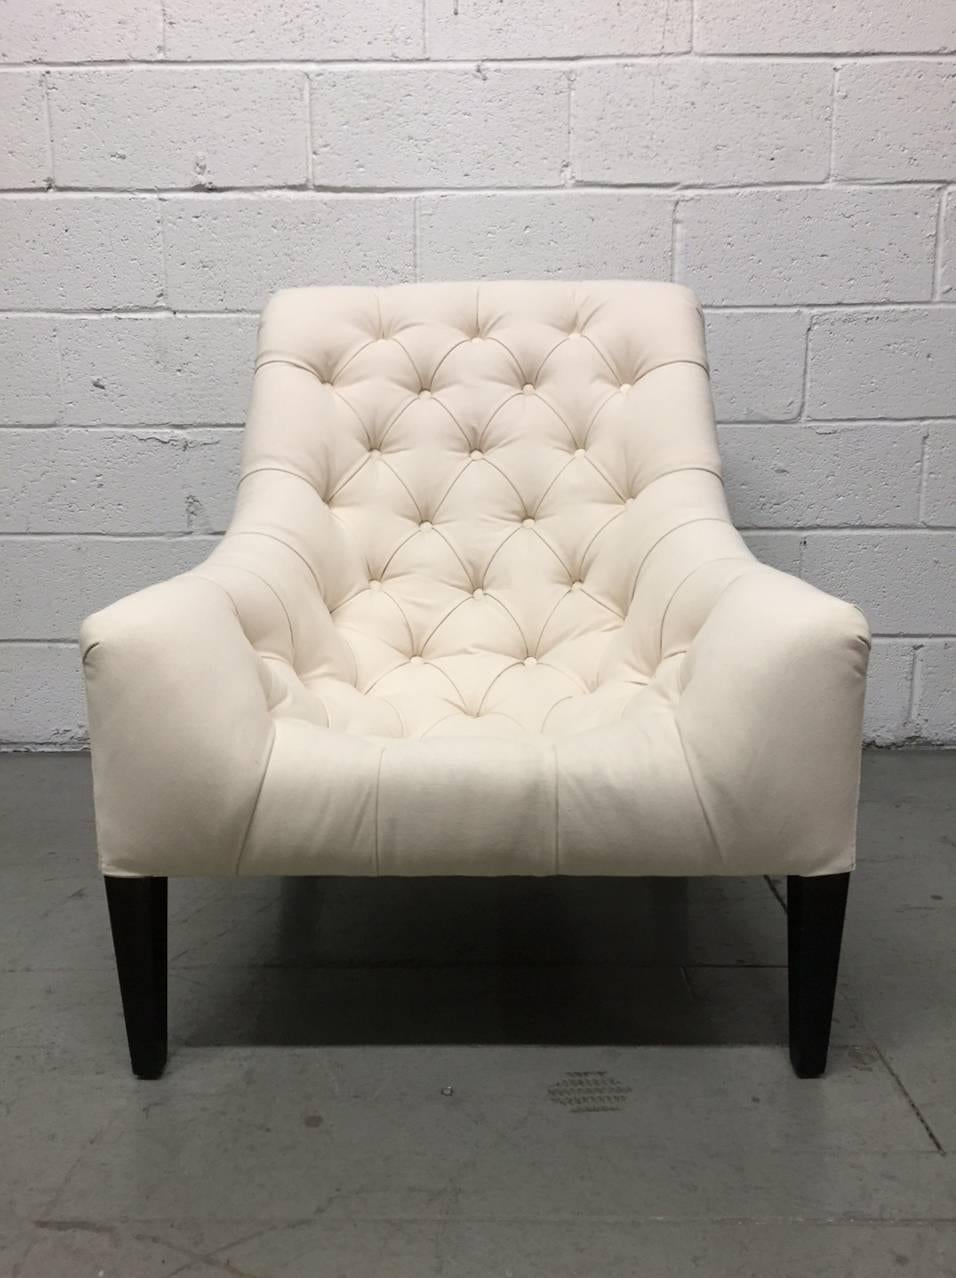 Pair of English tufted upholstered lounge chairs. Has wooden lacquered legs. Chairs are very comfortable Library chair. Upholstered in a linen-blend.
  